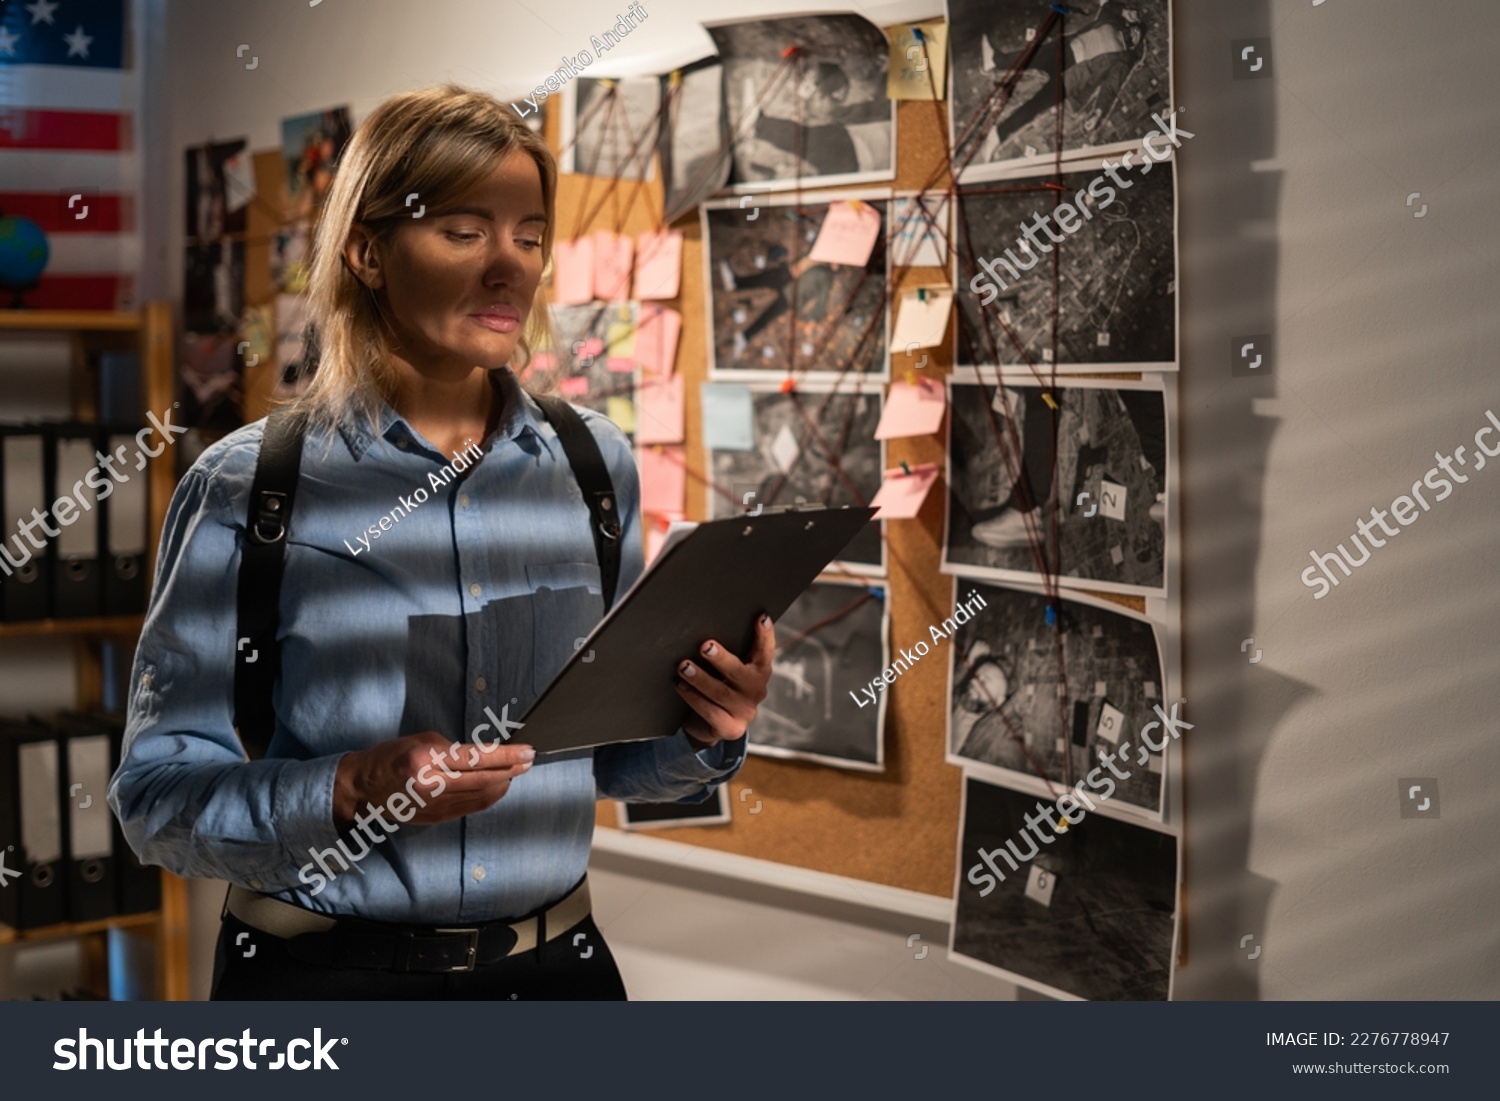 Woman private agent looking at crime investigation board holding clipboard, chasing serial killer. Copy space #2276778947